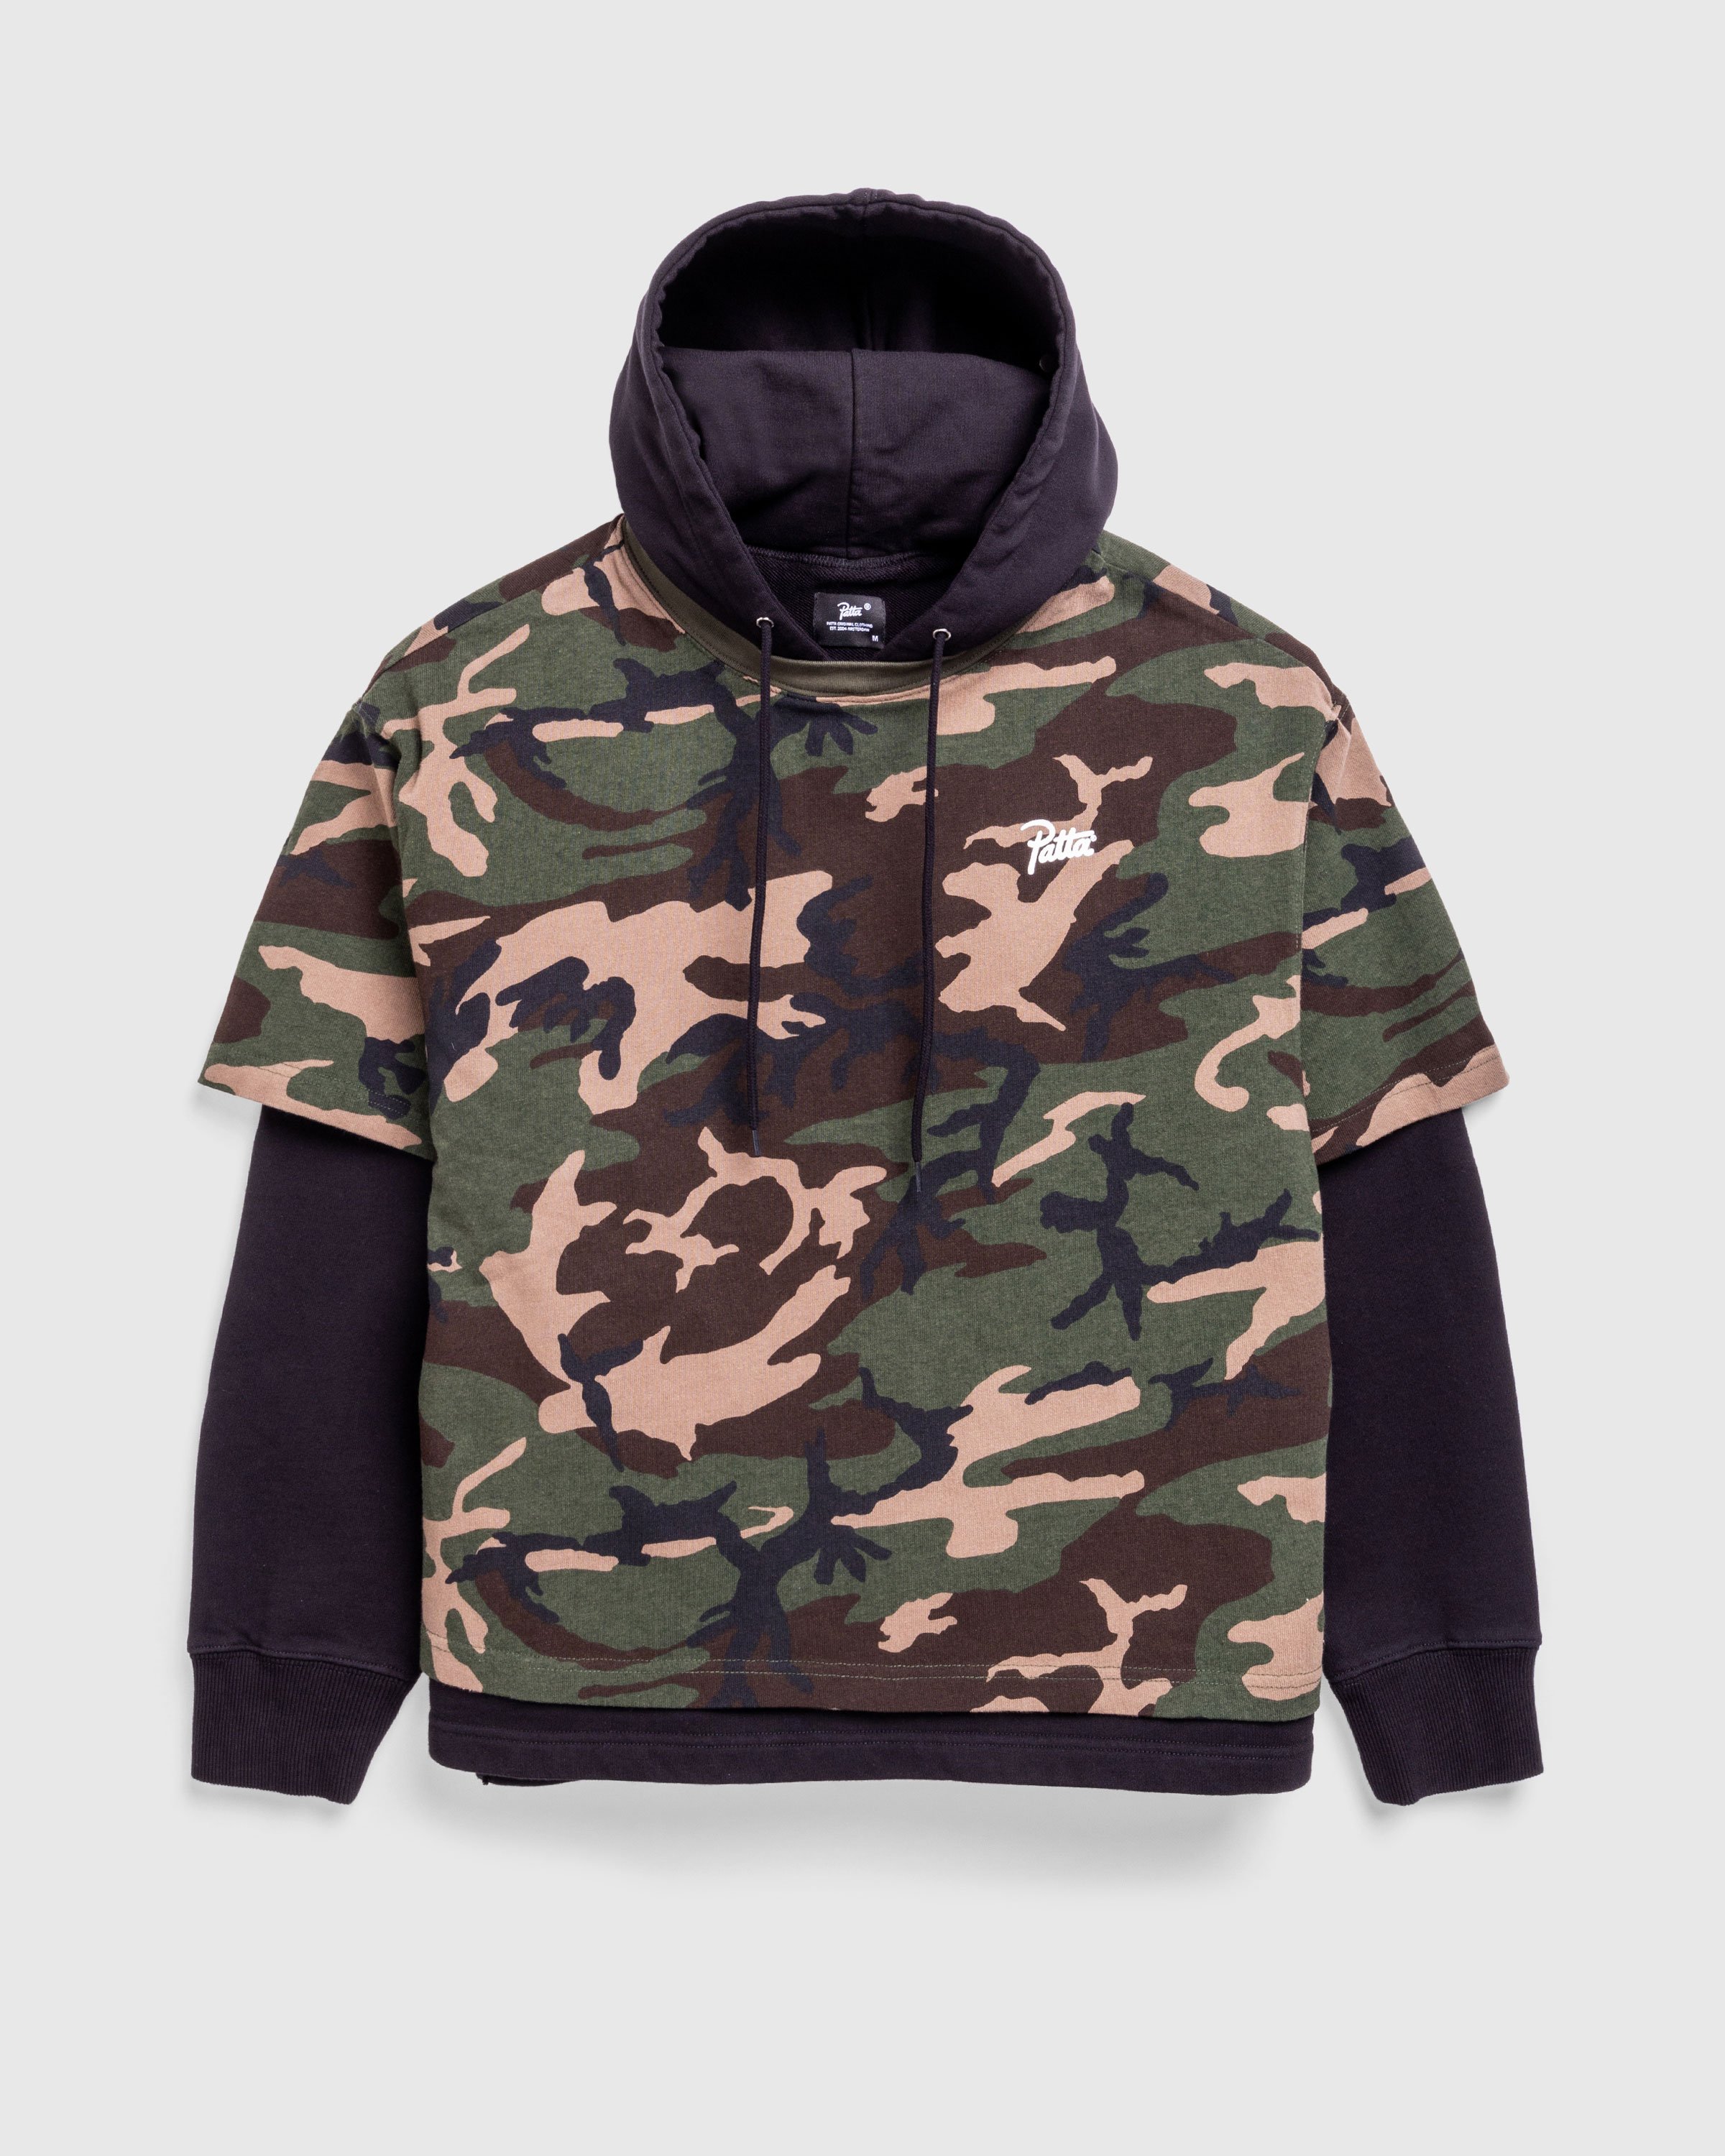 Patta - Always On Top Hooded Sweater Multi - Clothing - Multi - Image 1